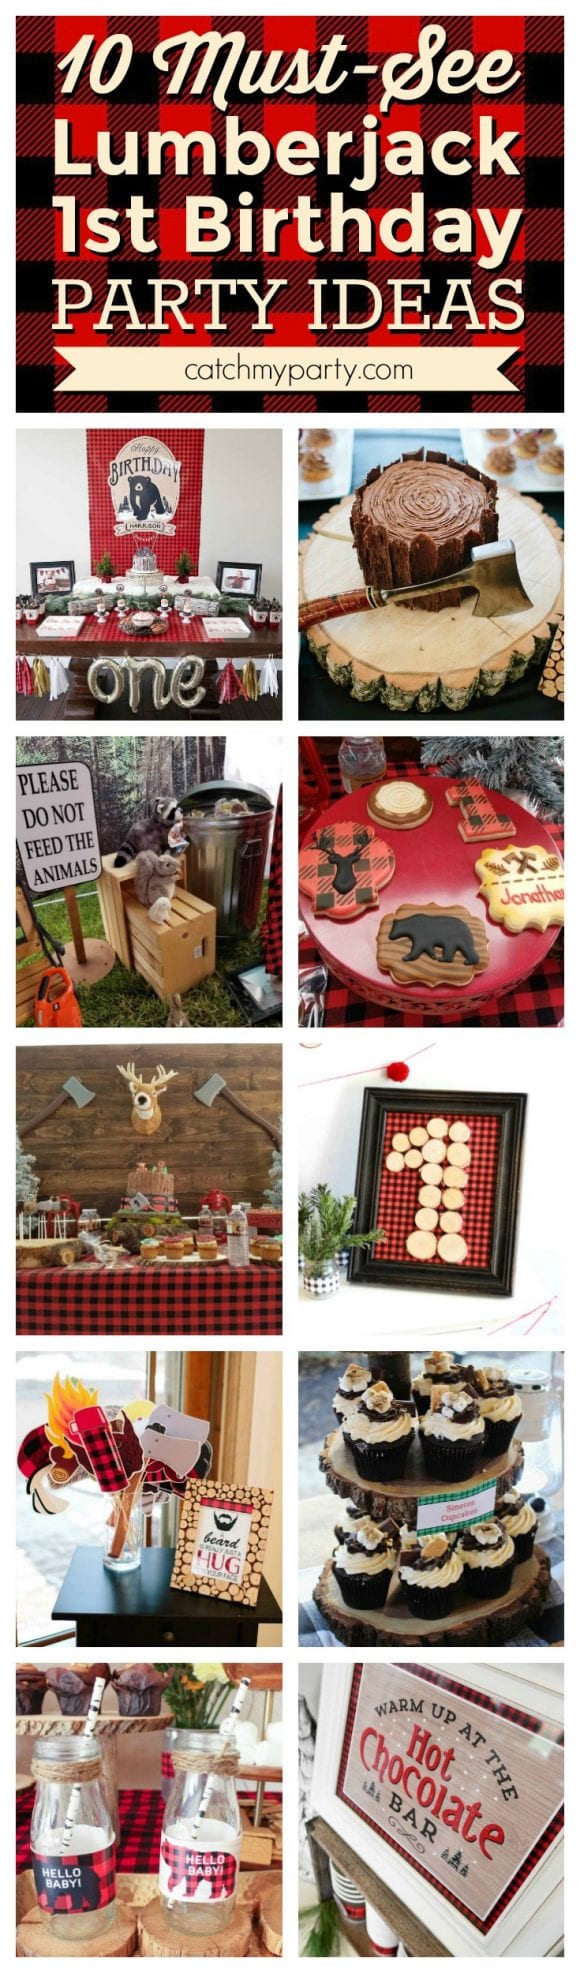 10 Must-See Lumberjack 1st Birthday Party Ideas | CatchMyParty.com